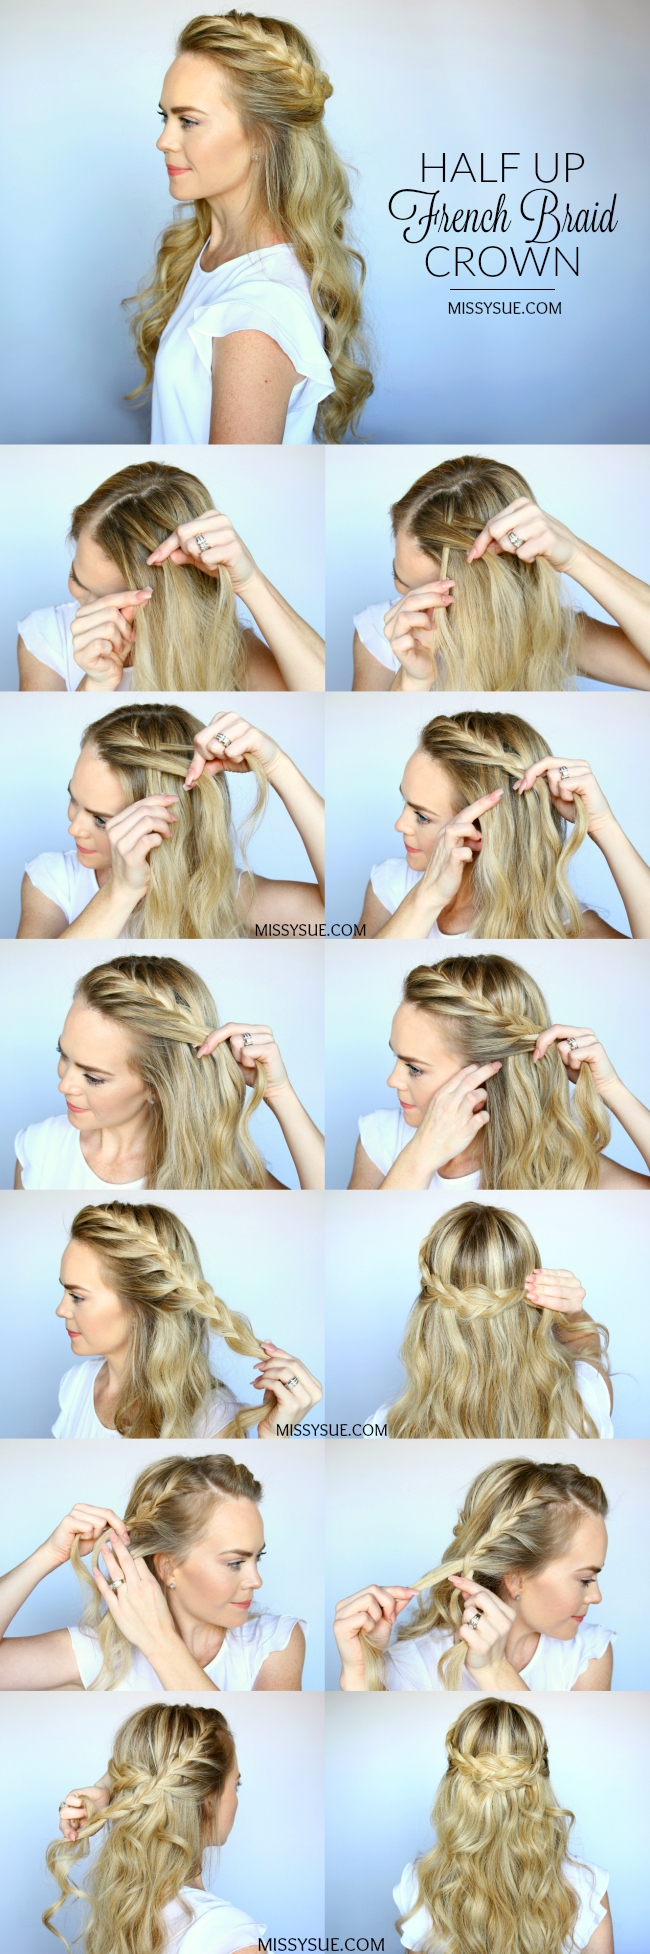 Watch: Boho Crown Braid Video How-To behindthechair.com